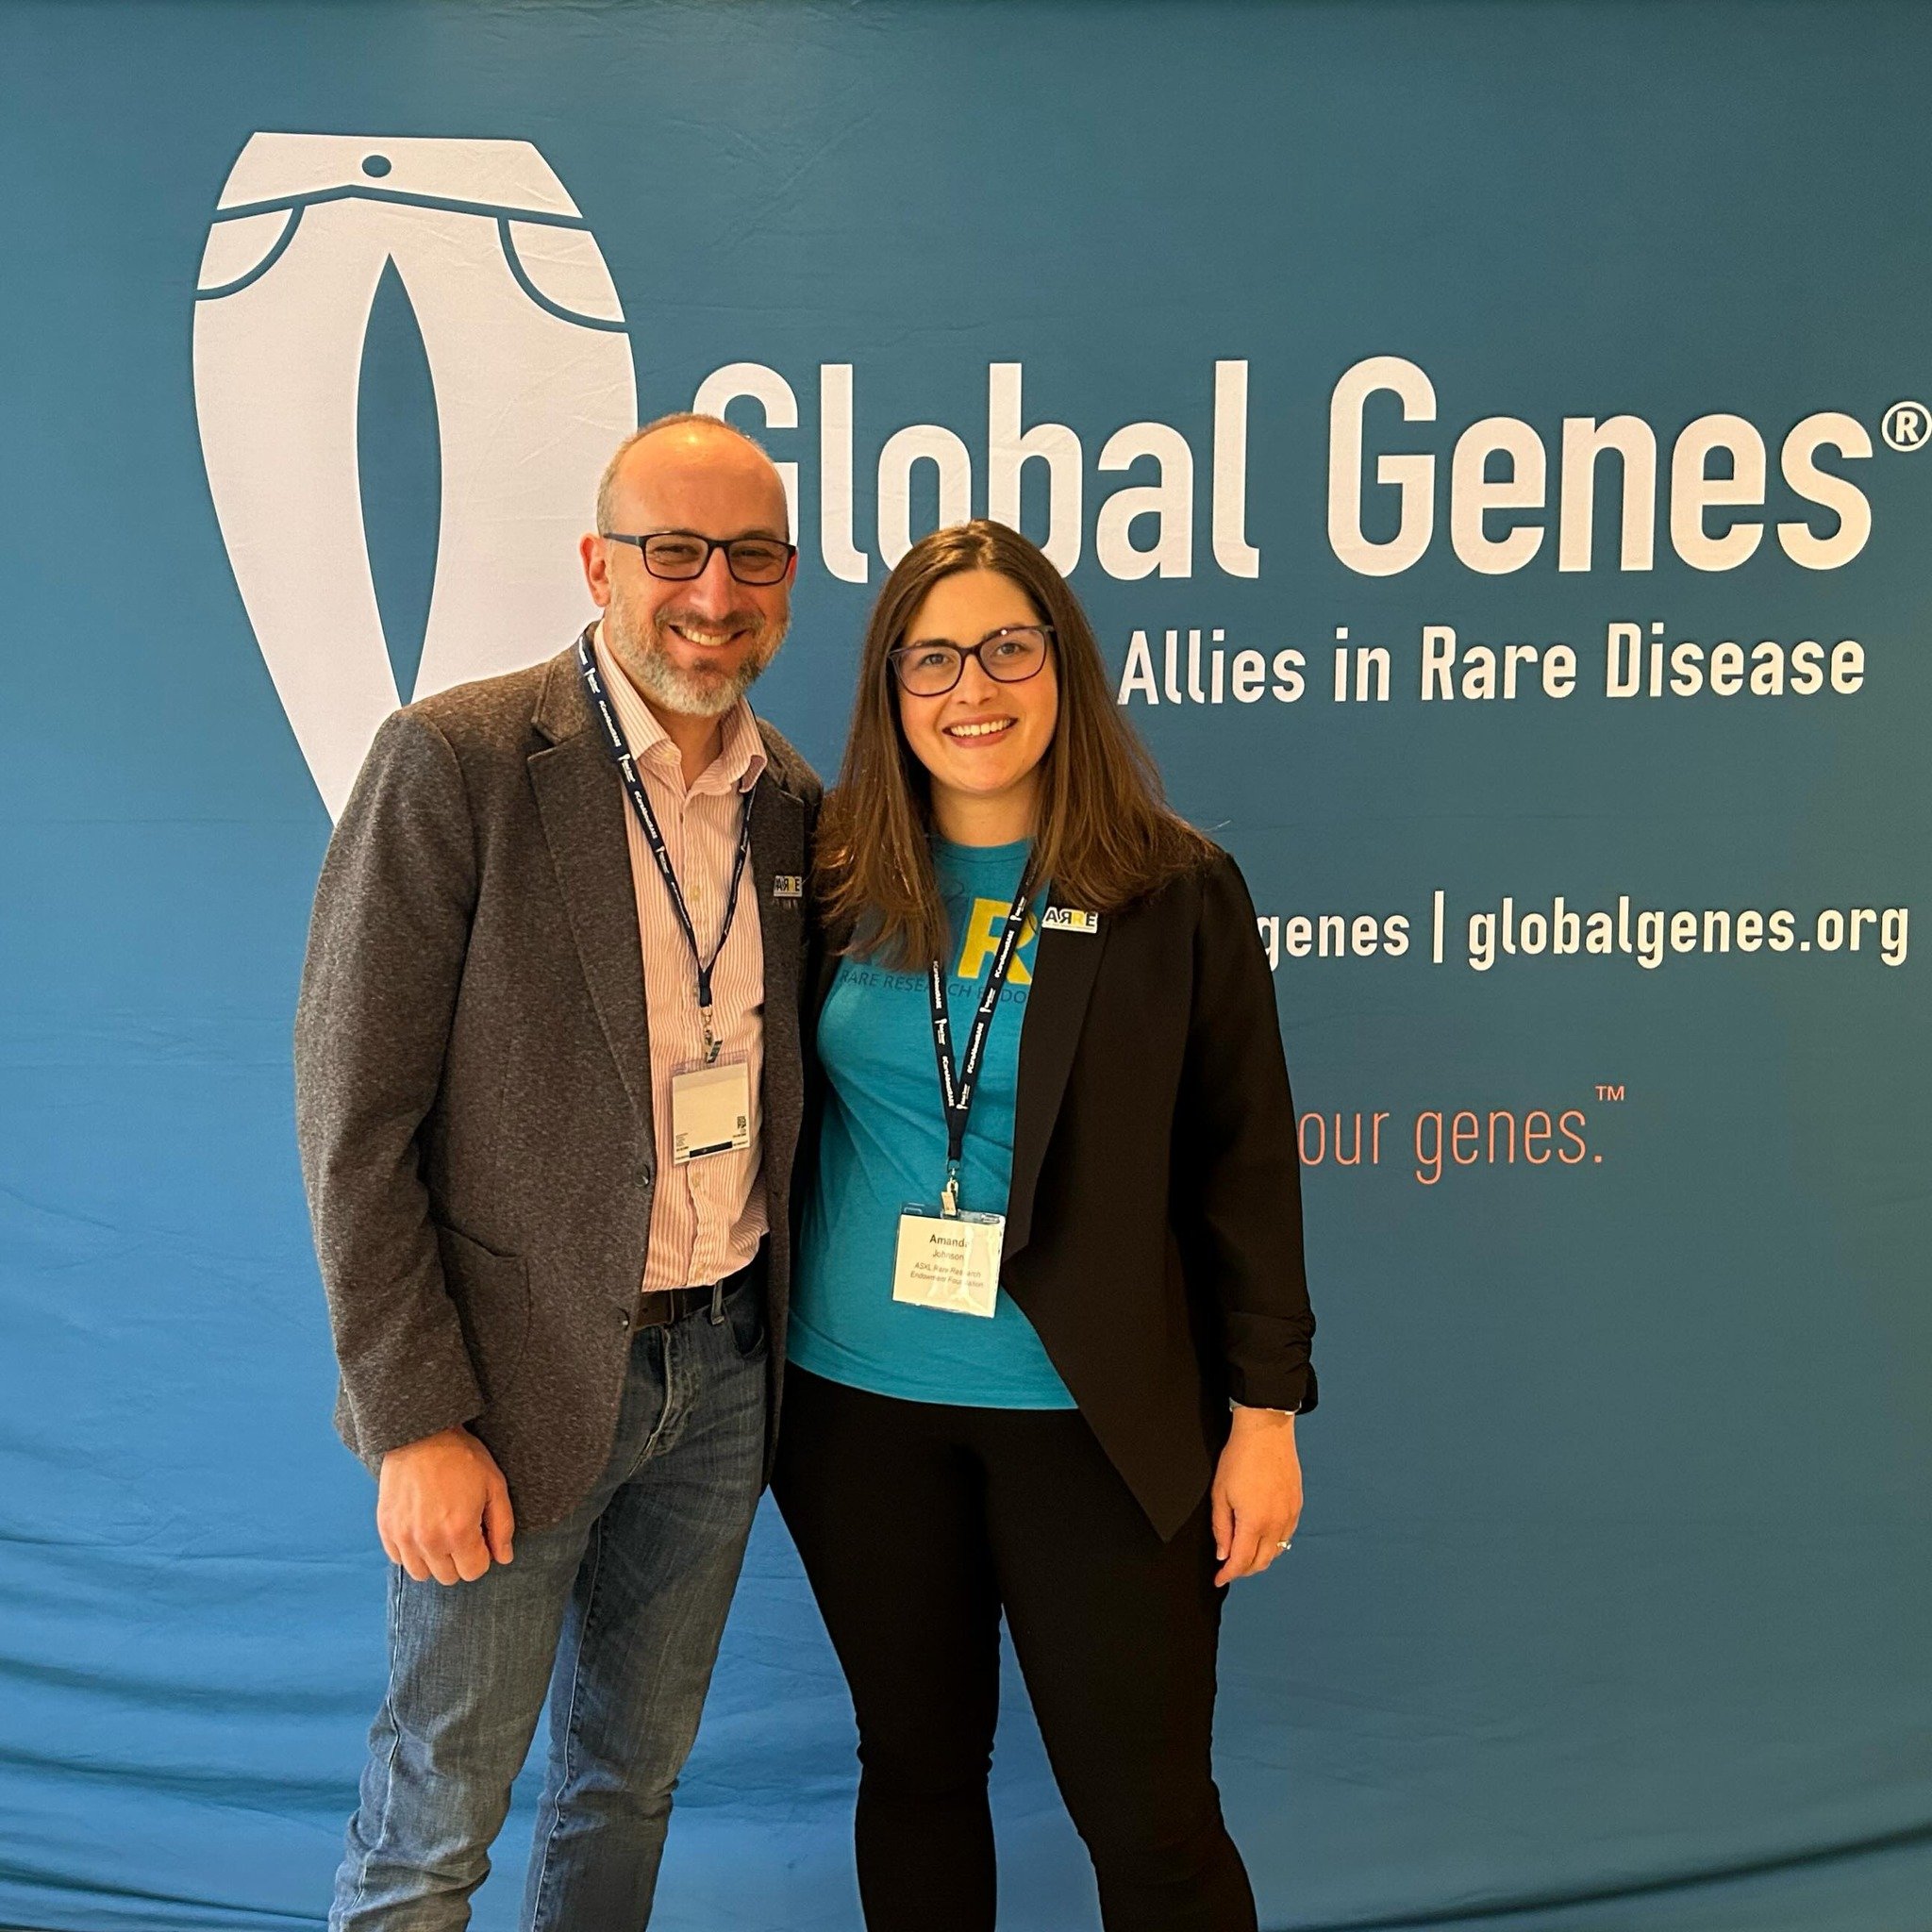 ARRE Foundation Executive Director Amanda Johnson and Board member Daniel Ordower are attending the Rare Drug Development Symposium in Philadelphia from April 30-May 1. This conference, hosted by @globalgenes and the @odc_upenn, aims to help patient 